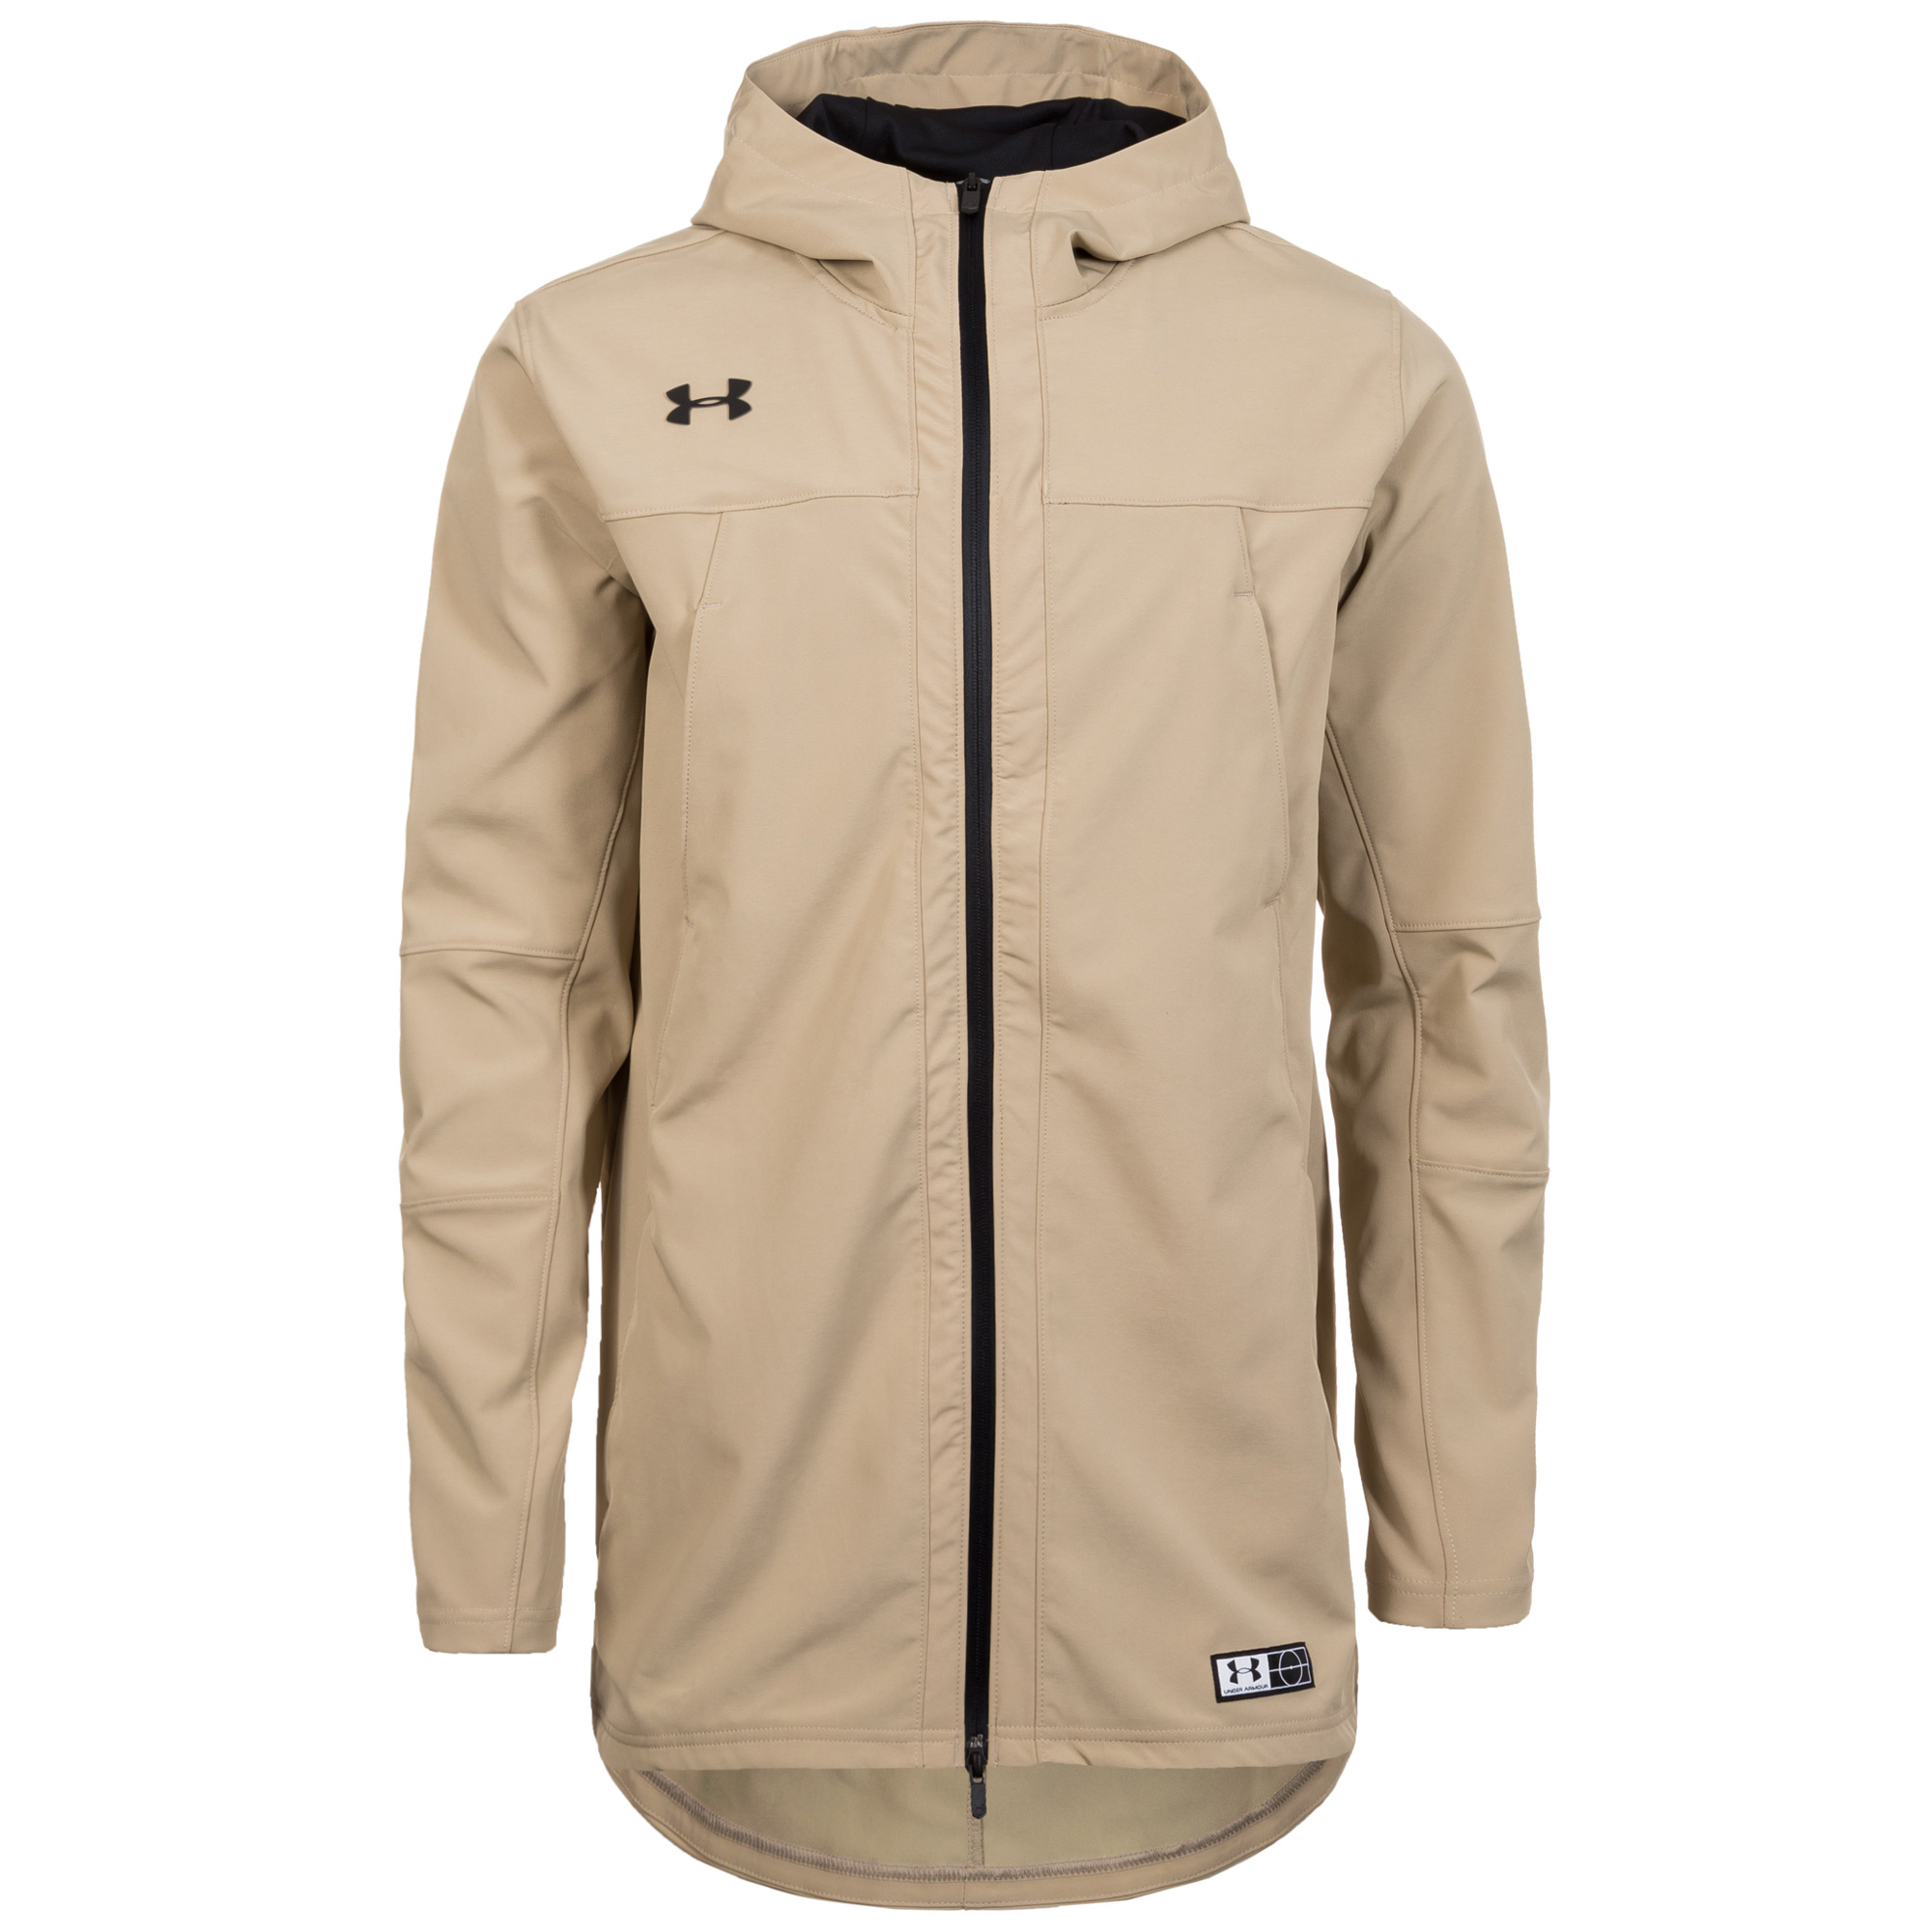 under armour accelerate jacket